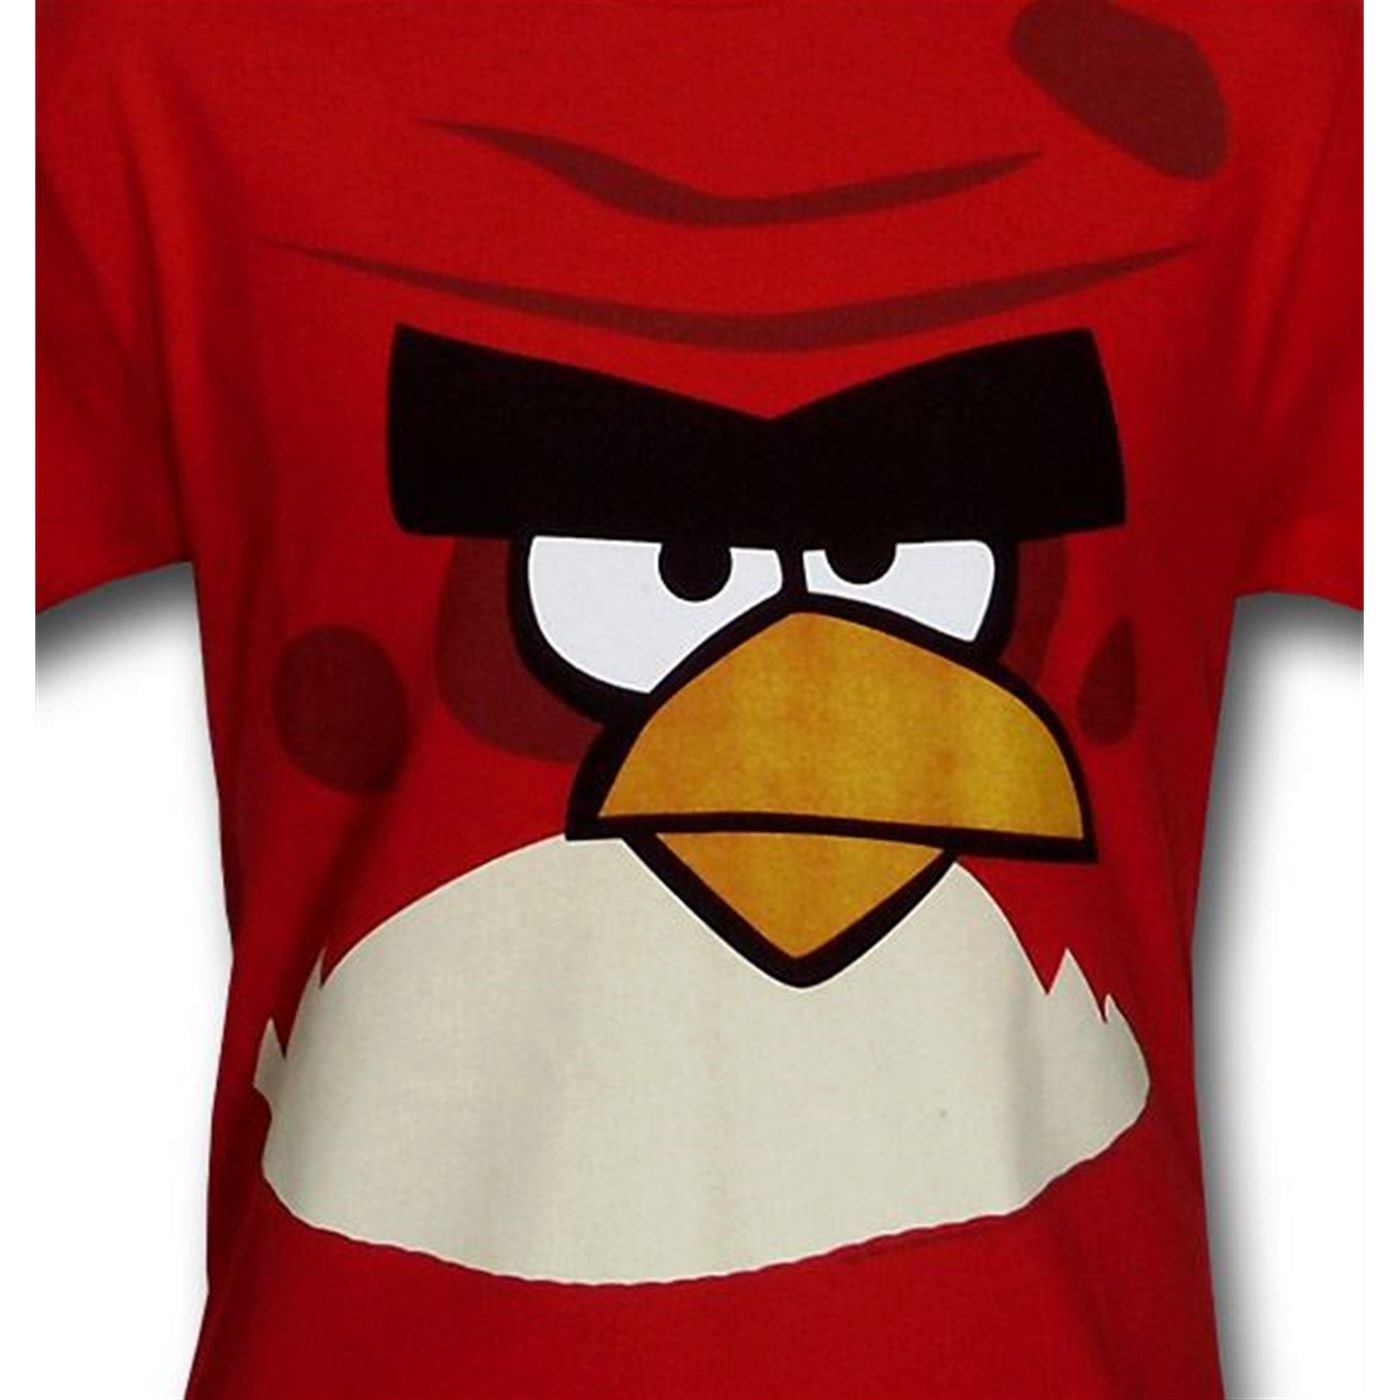 Angry Birds Big Brother T-Shirt